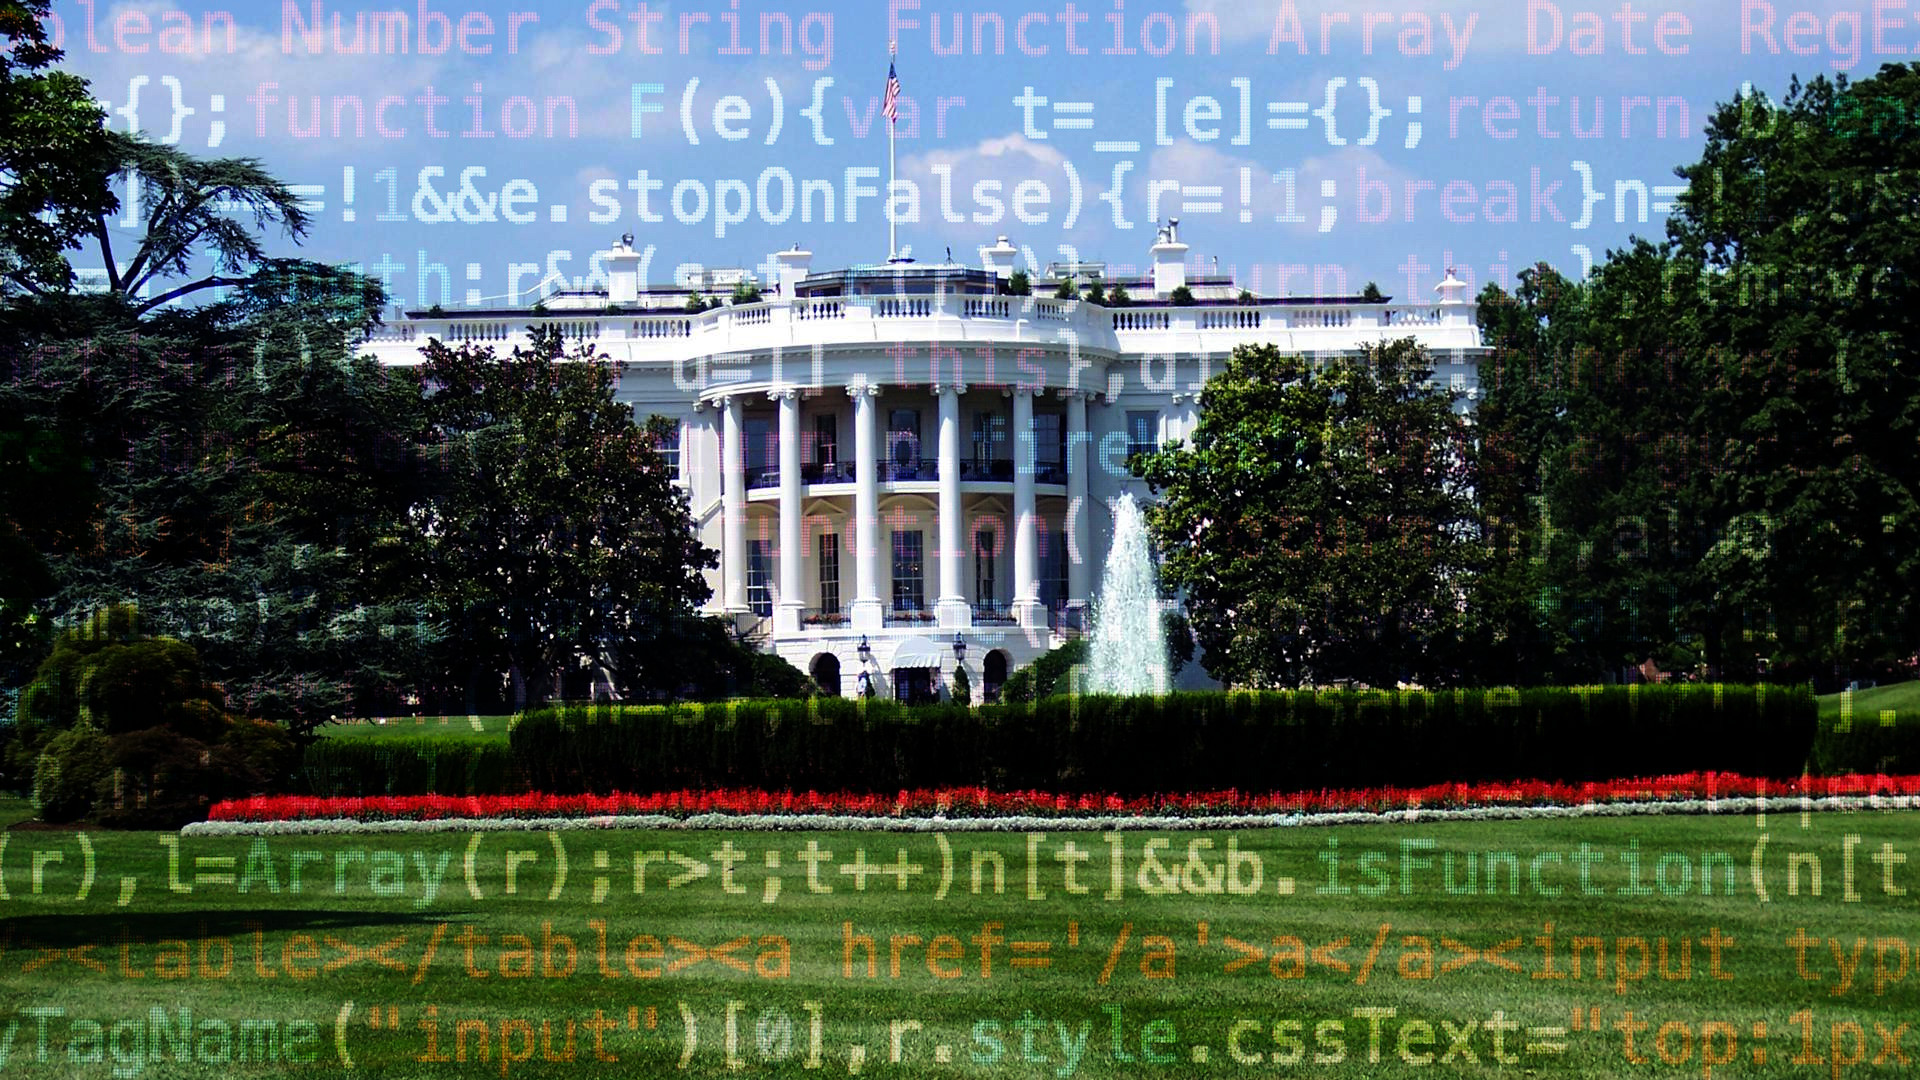 White House urges developers to avoid C and C++, use 'memory-safe' programming languages